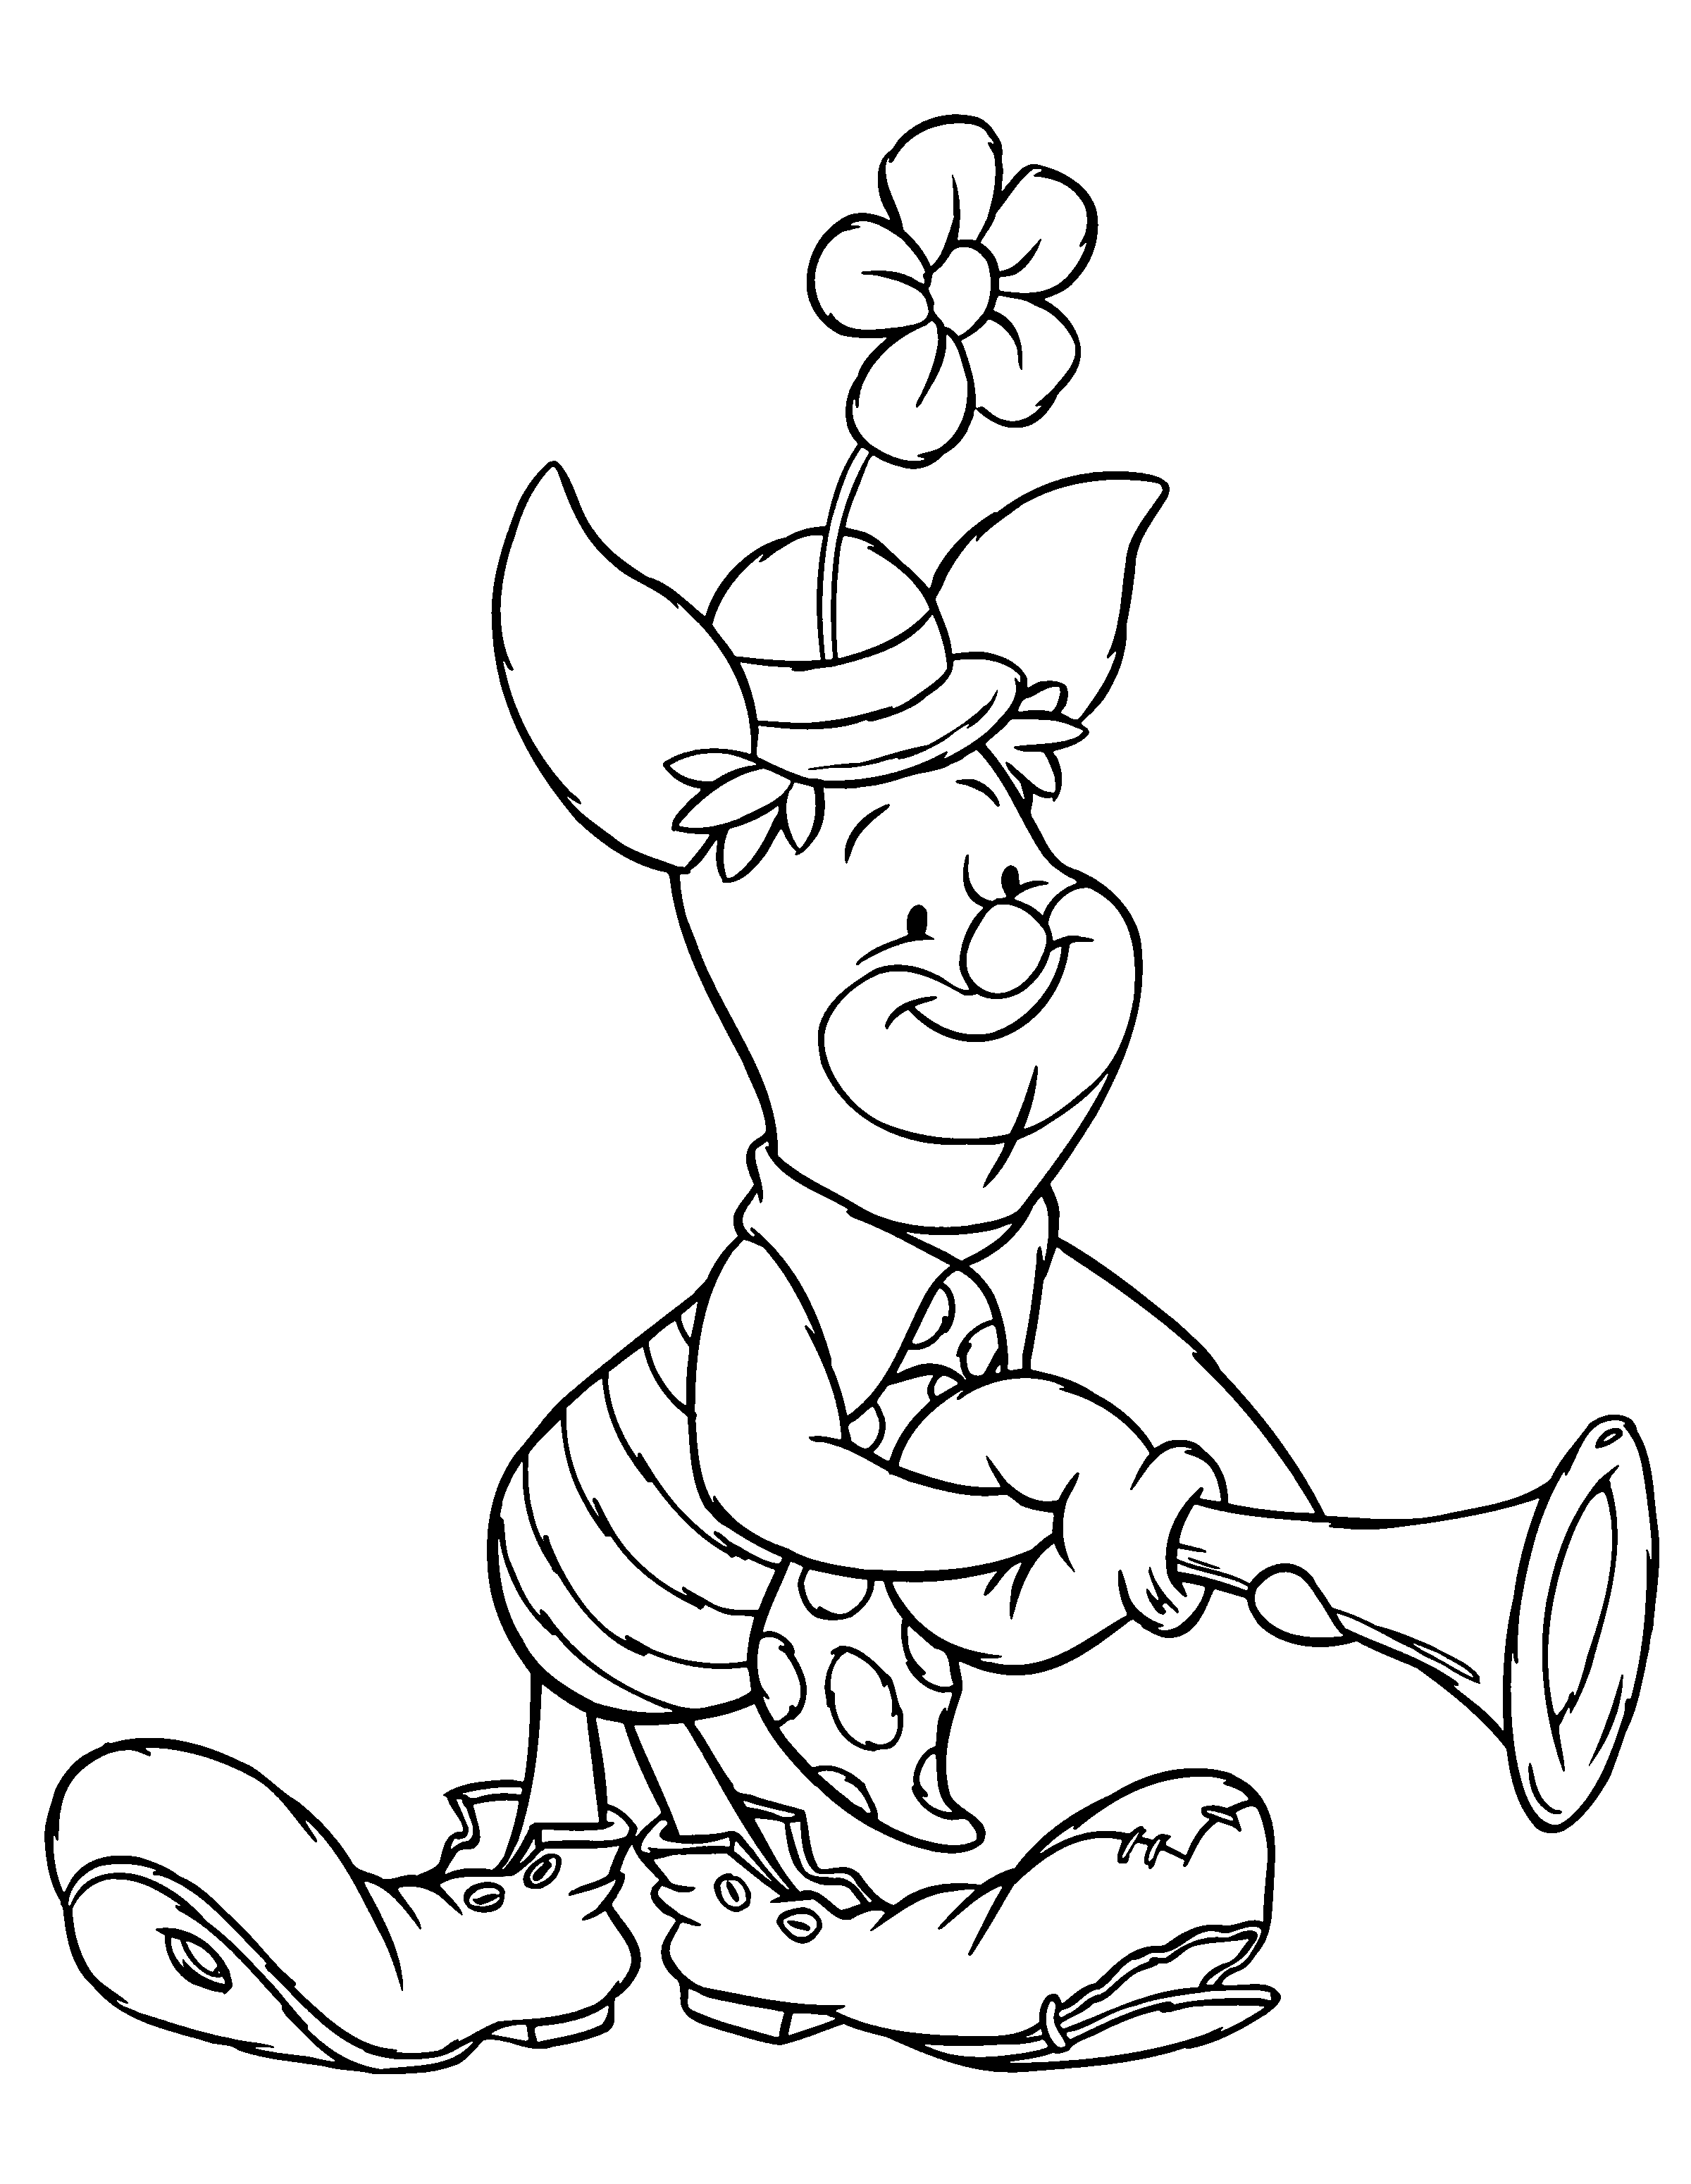 Coloring Page - Winnie the pooh coloring pages 41